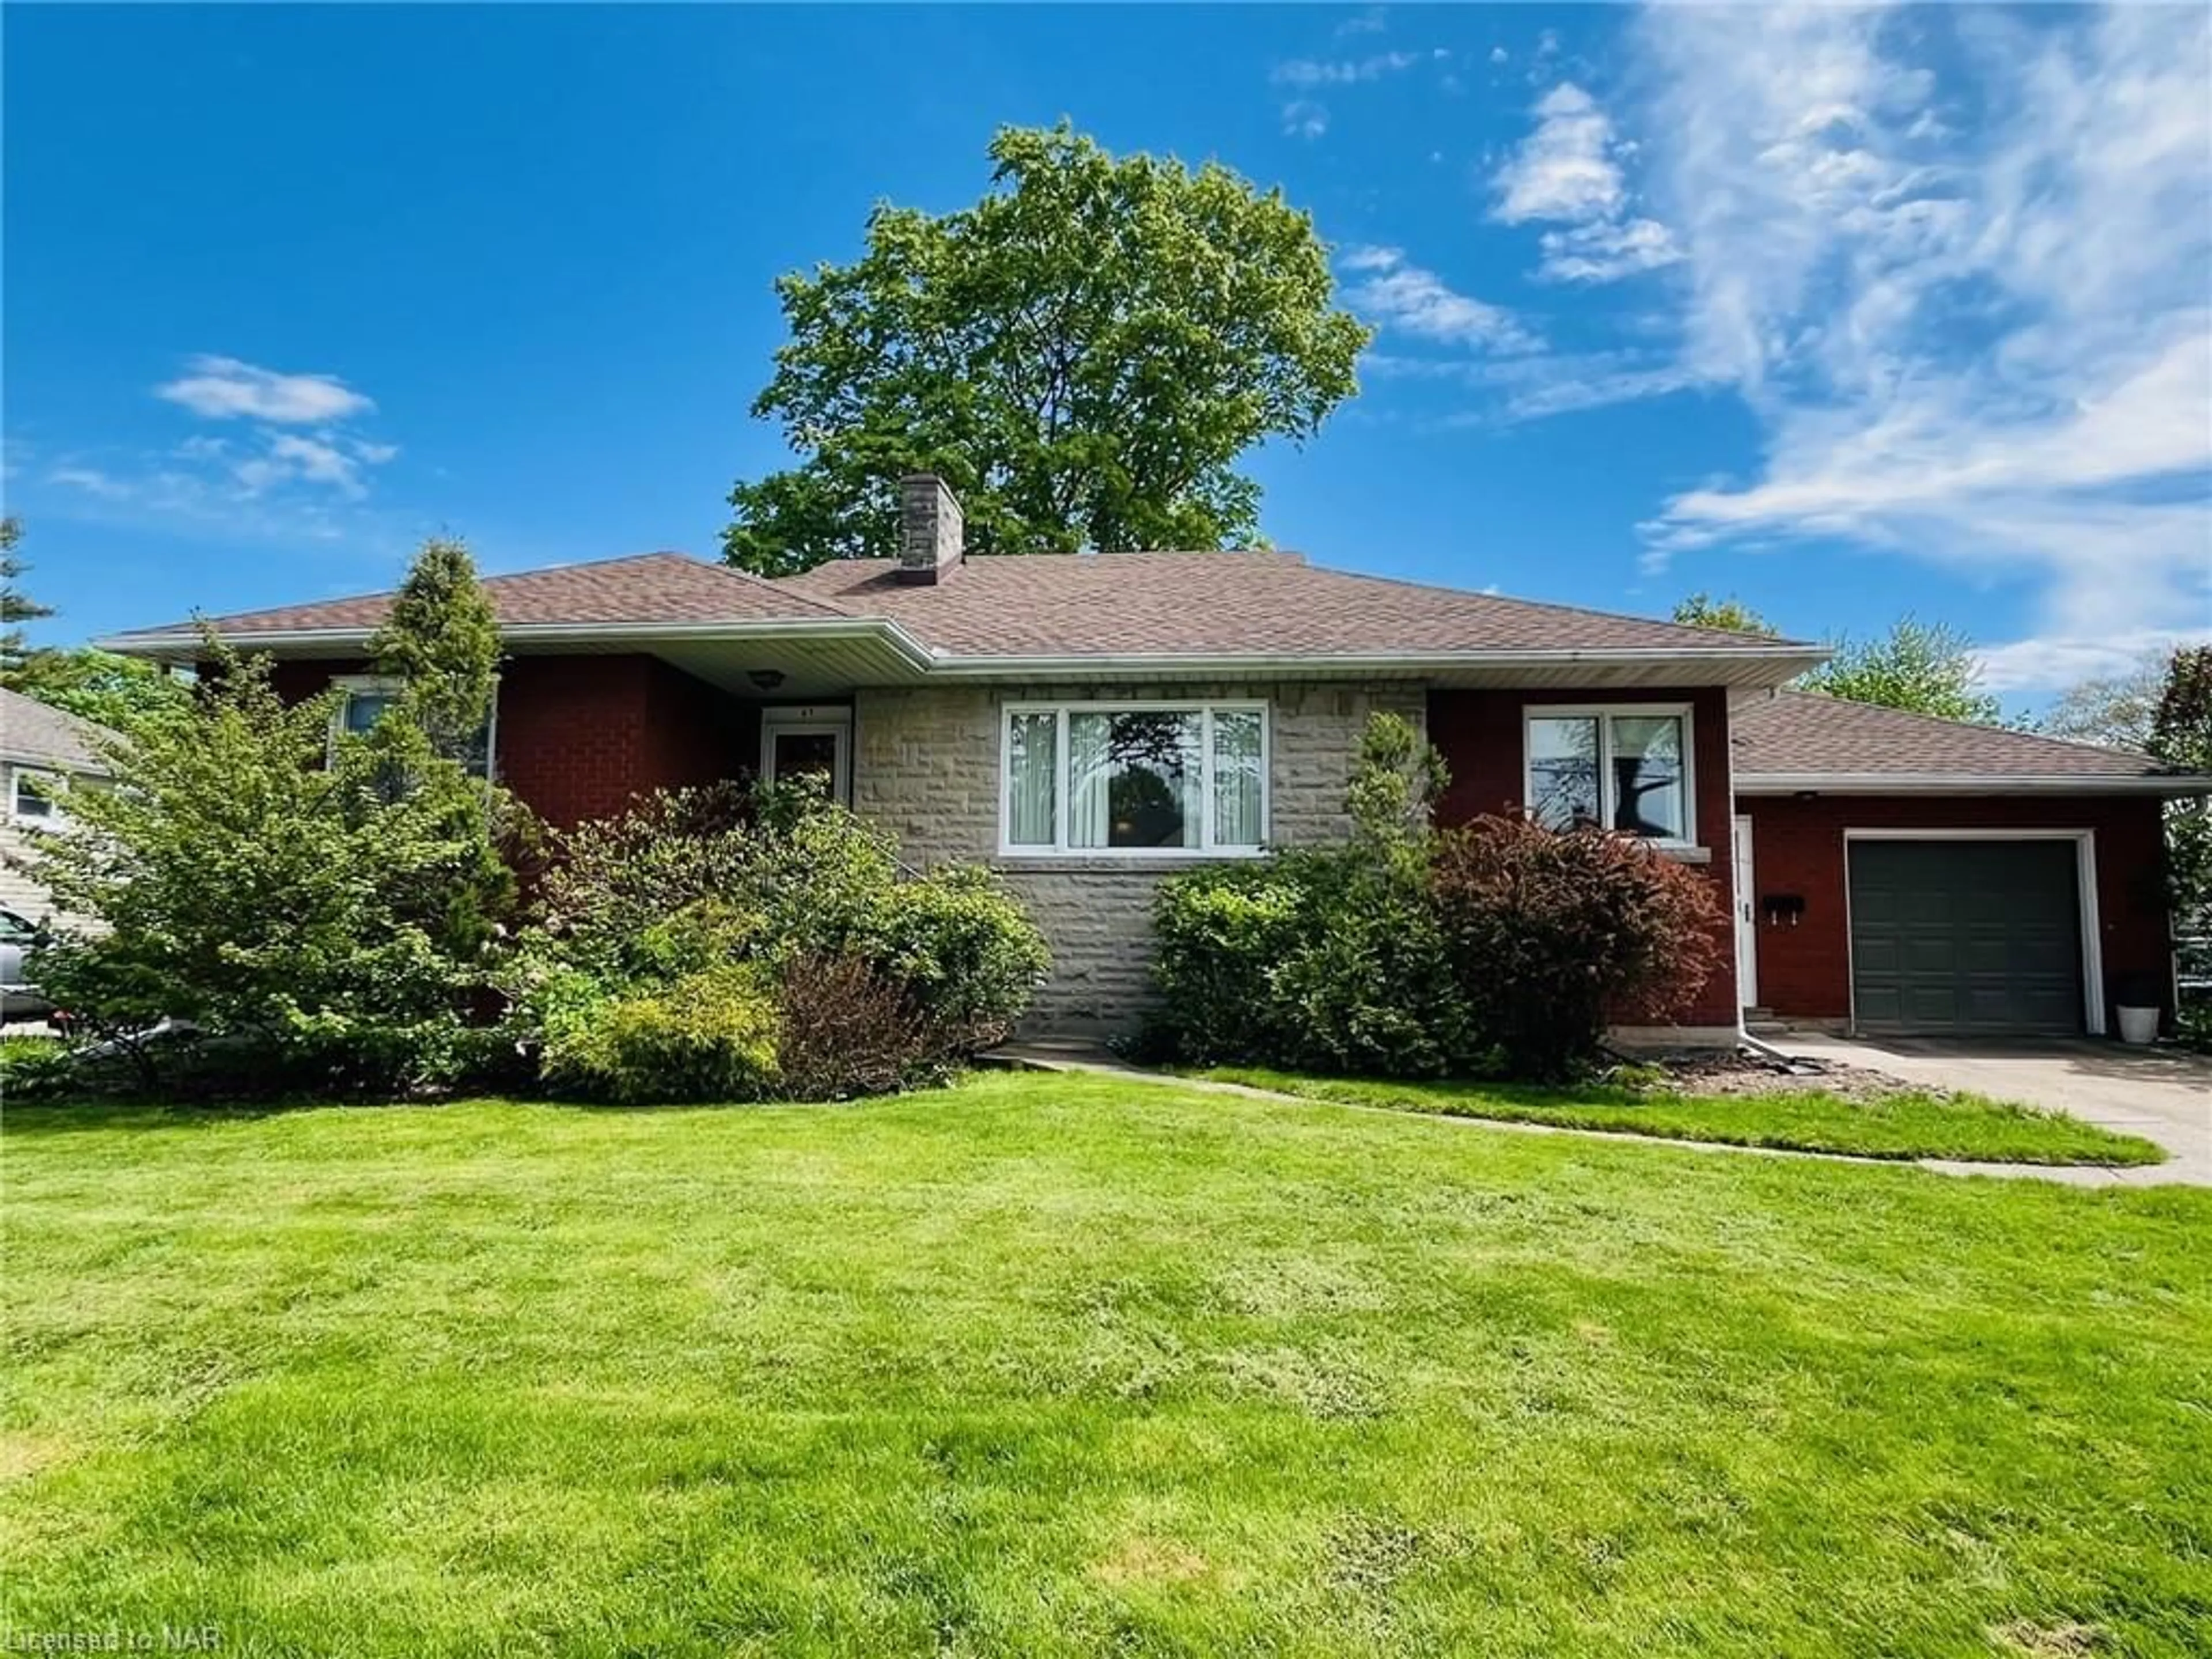 Frontside or backside of a home for 67 Clare Ave, Port Colborne Ontario L3K 5H5